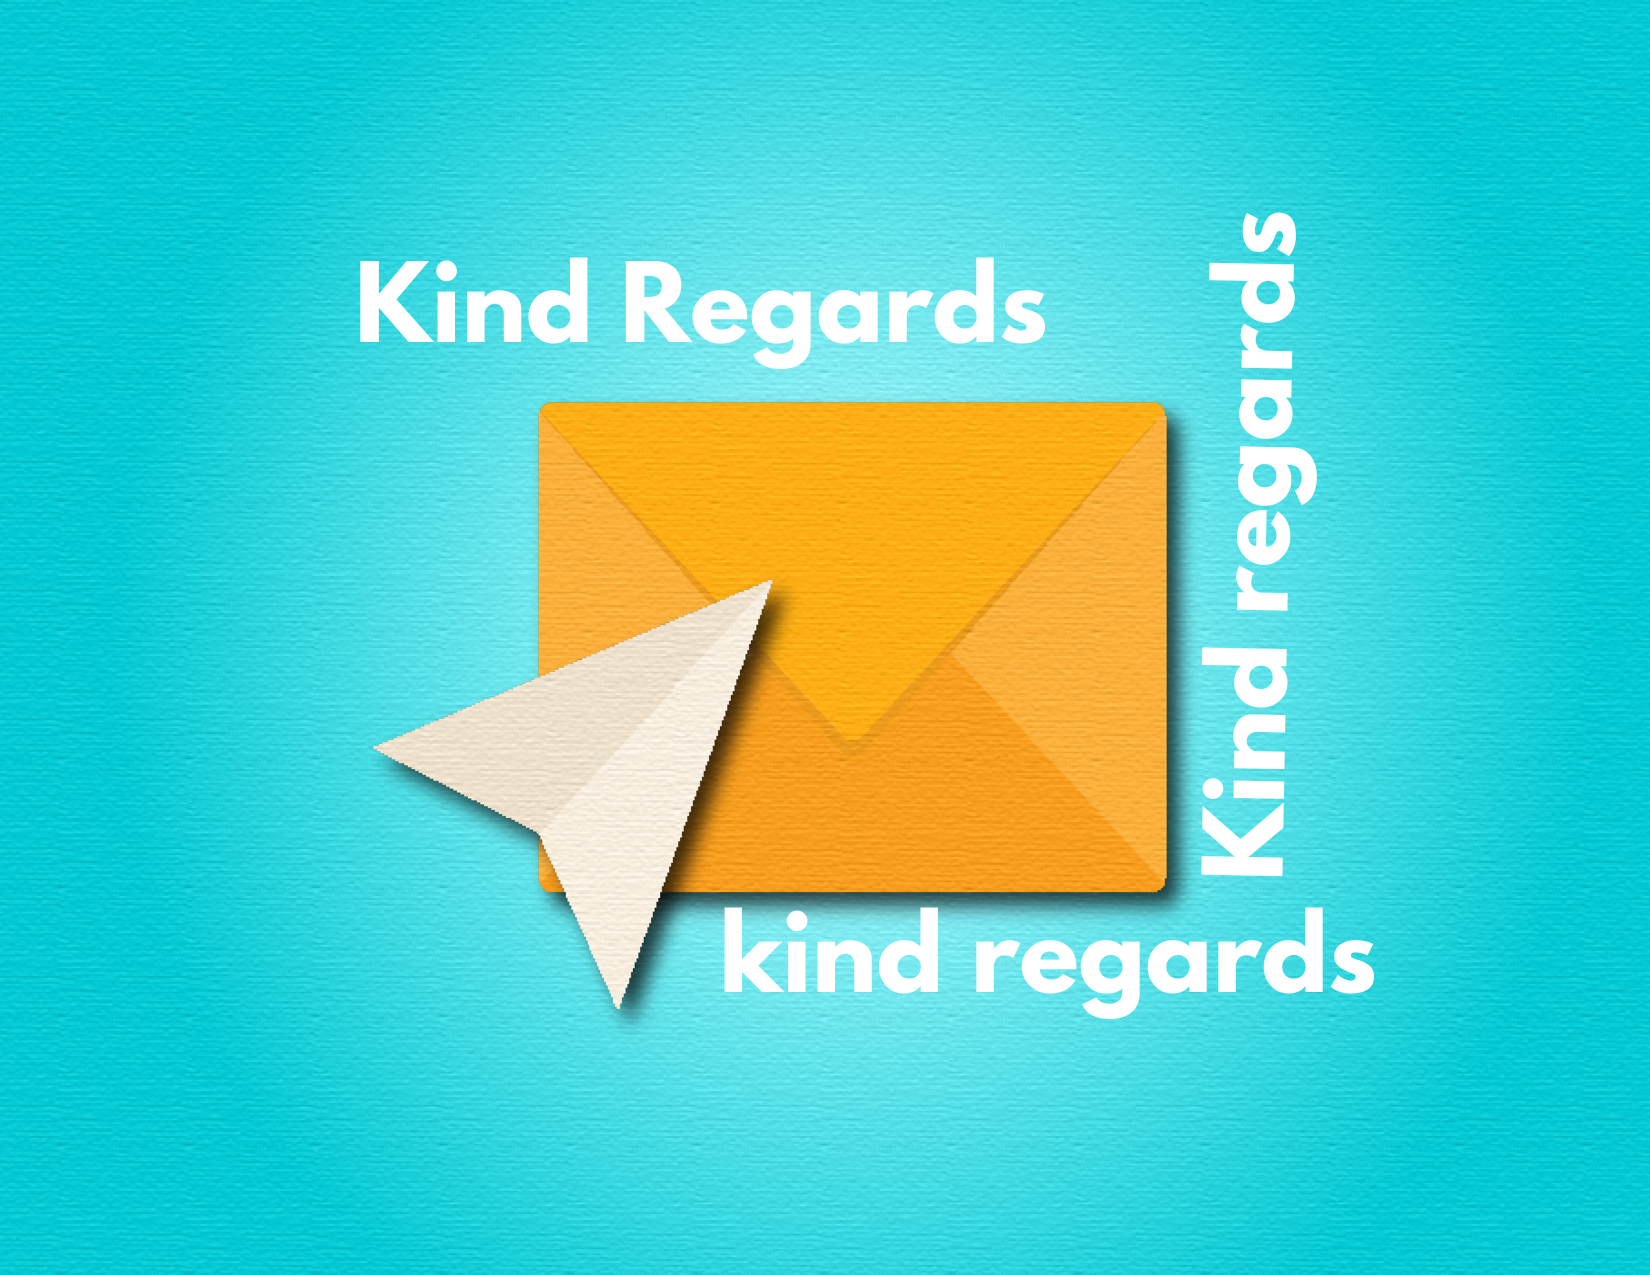 is kind regards capitalised? A graphic showing the email icon with various variations of "Kind Regards" - Capitalised, non capitalised, etc, to signify the question: is kind regards capitalised?